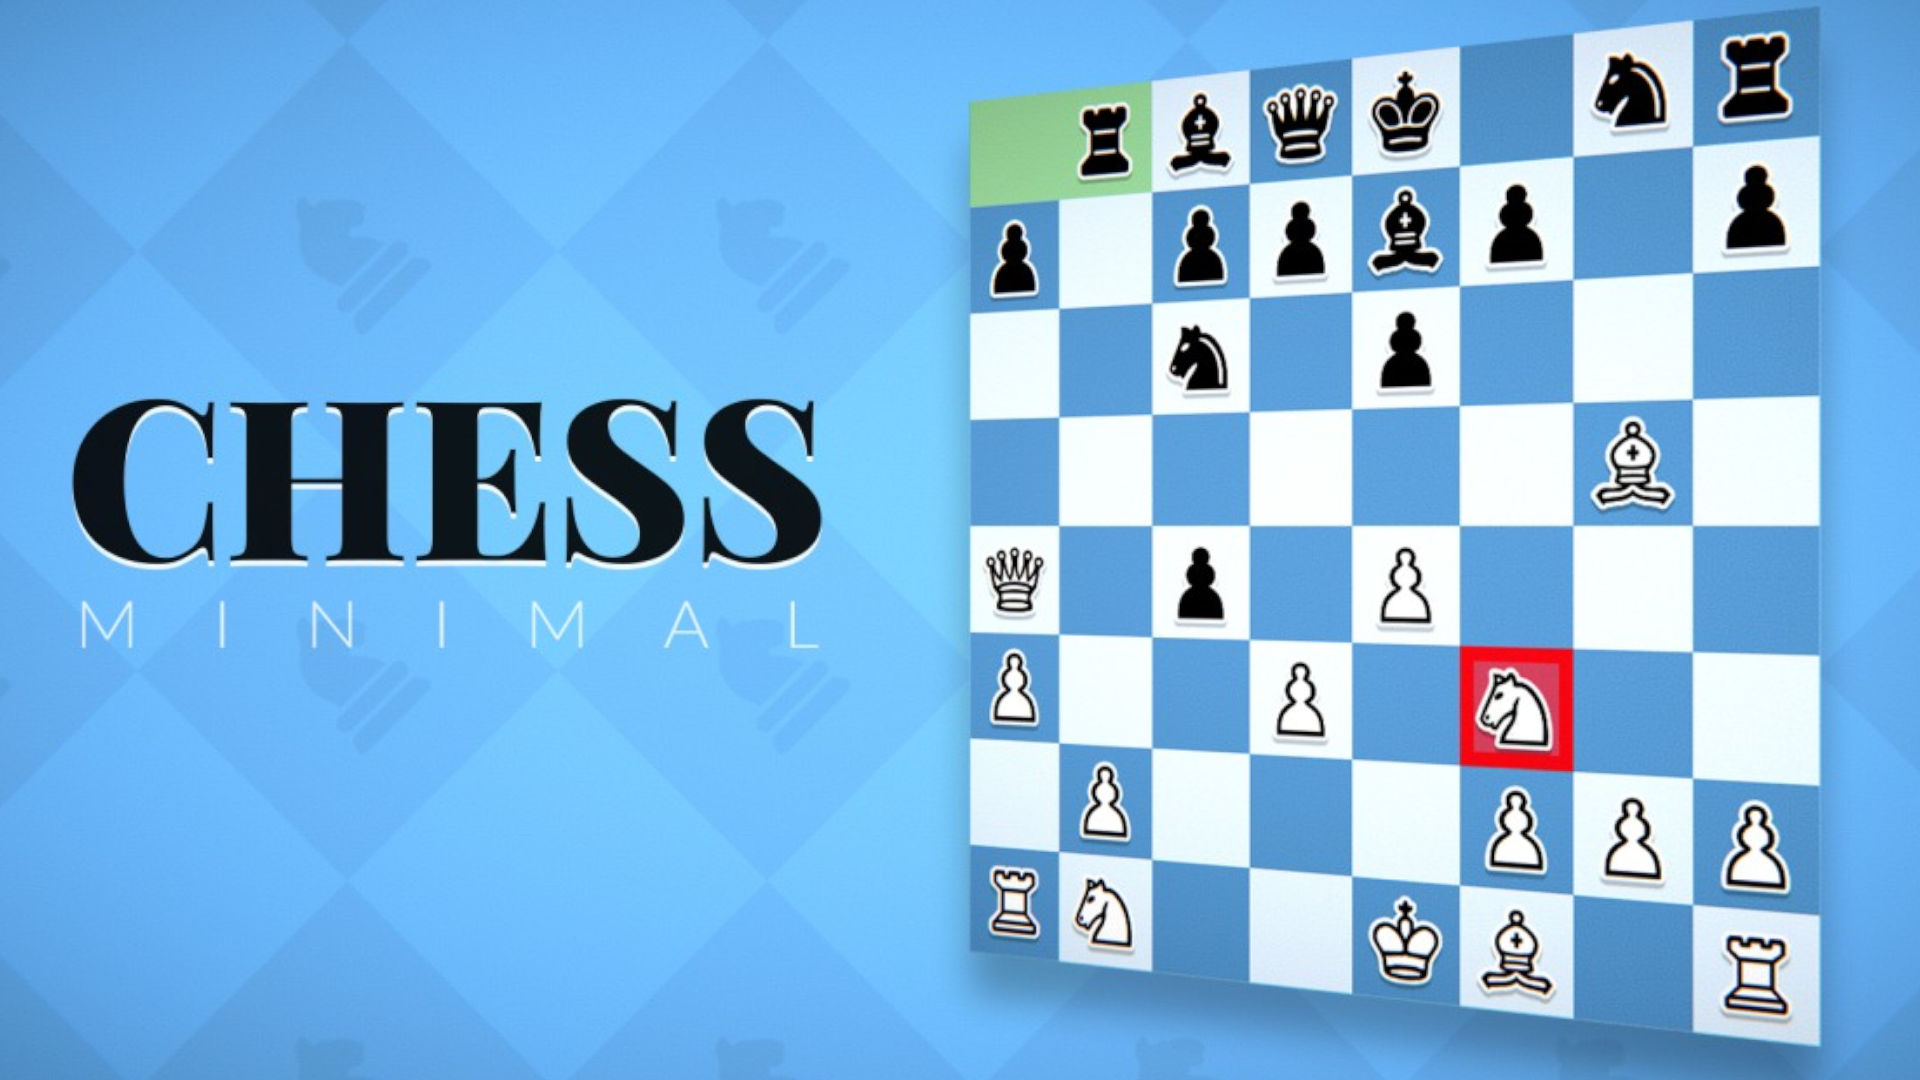 How do I 'pass and play' on my mobile device? (Android) - Chess